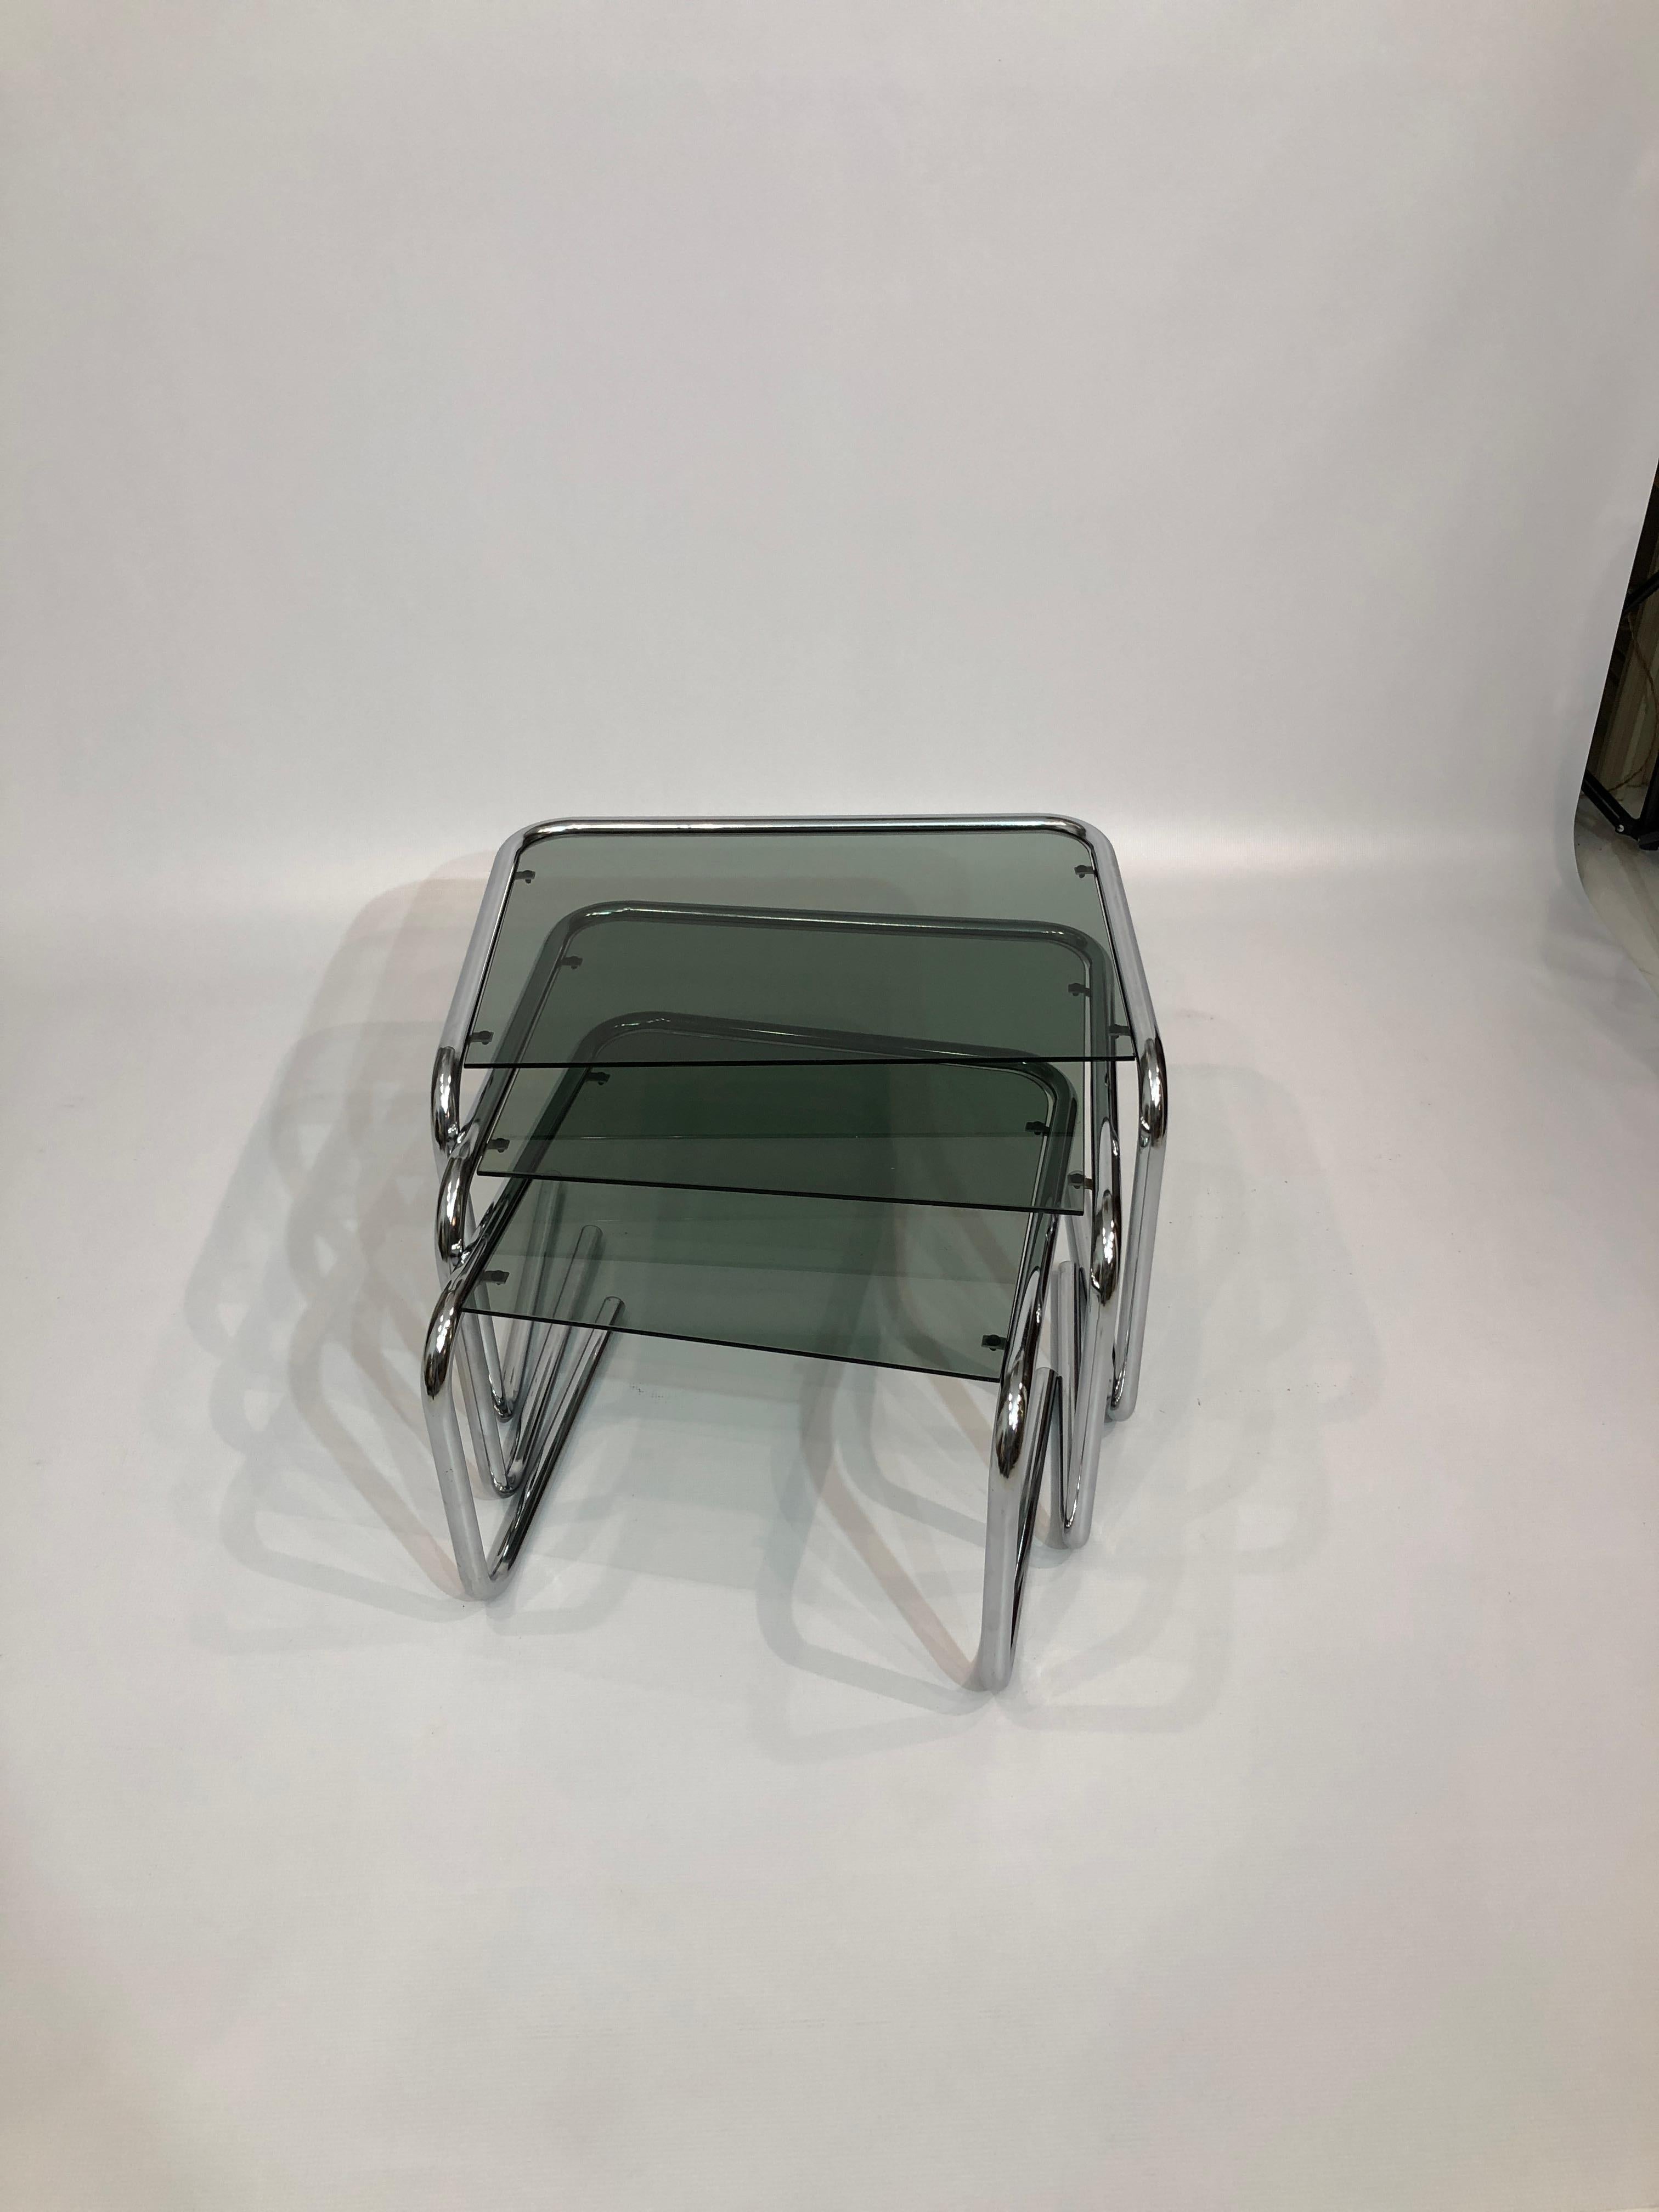 Italian Postmodern Nesting Side Tables 1970s Chrome Cantilever Pieff Style Smoked Glass